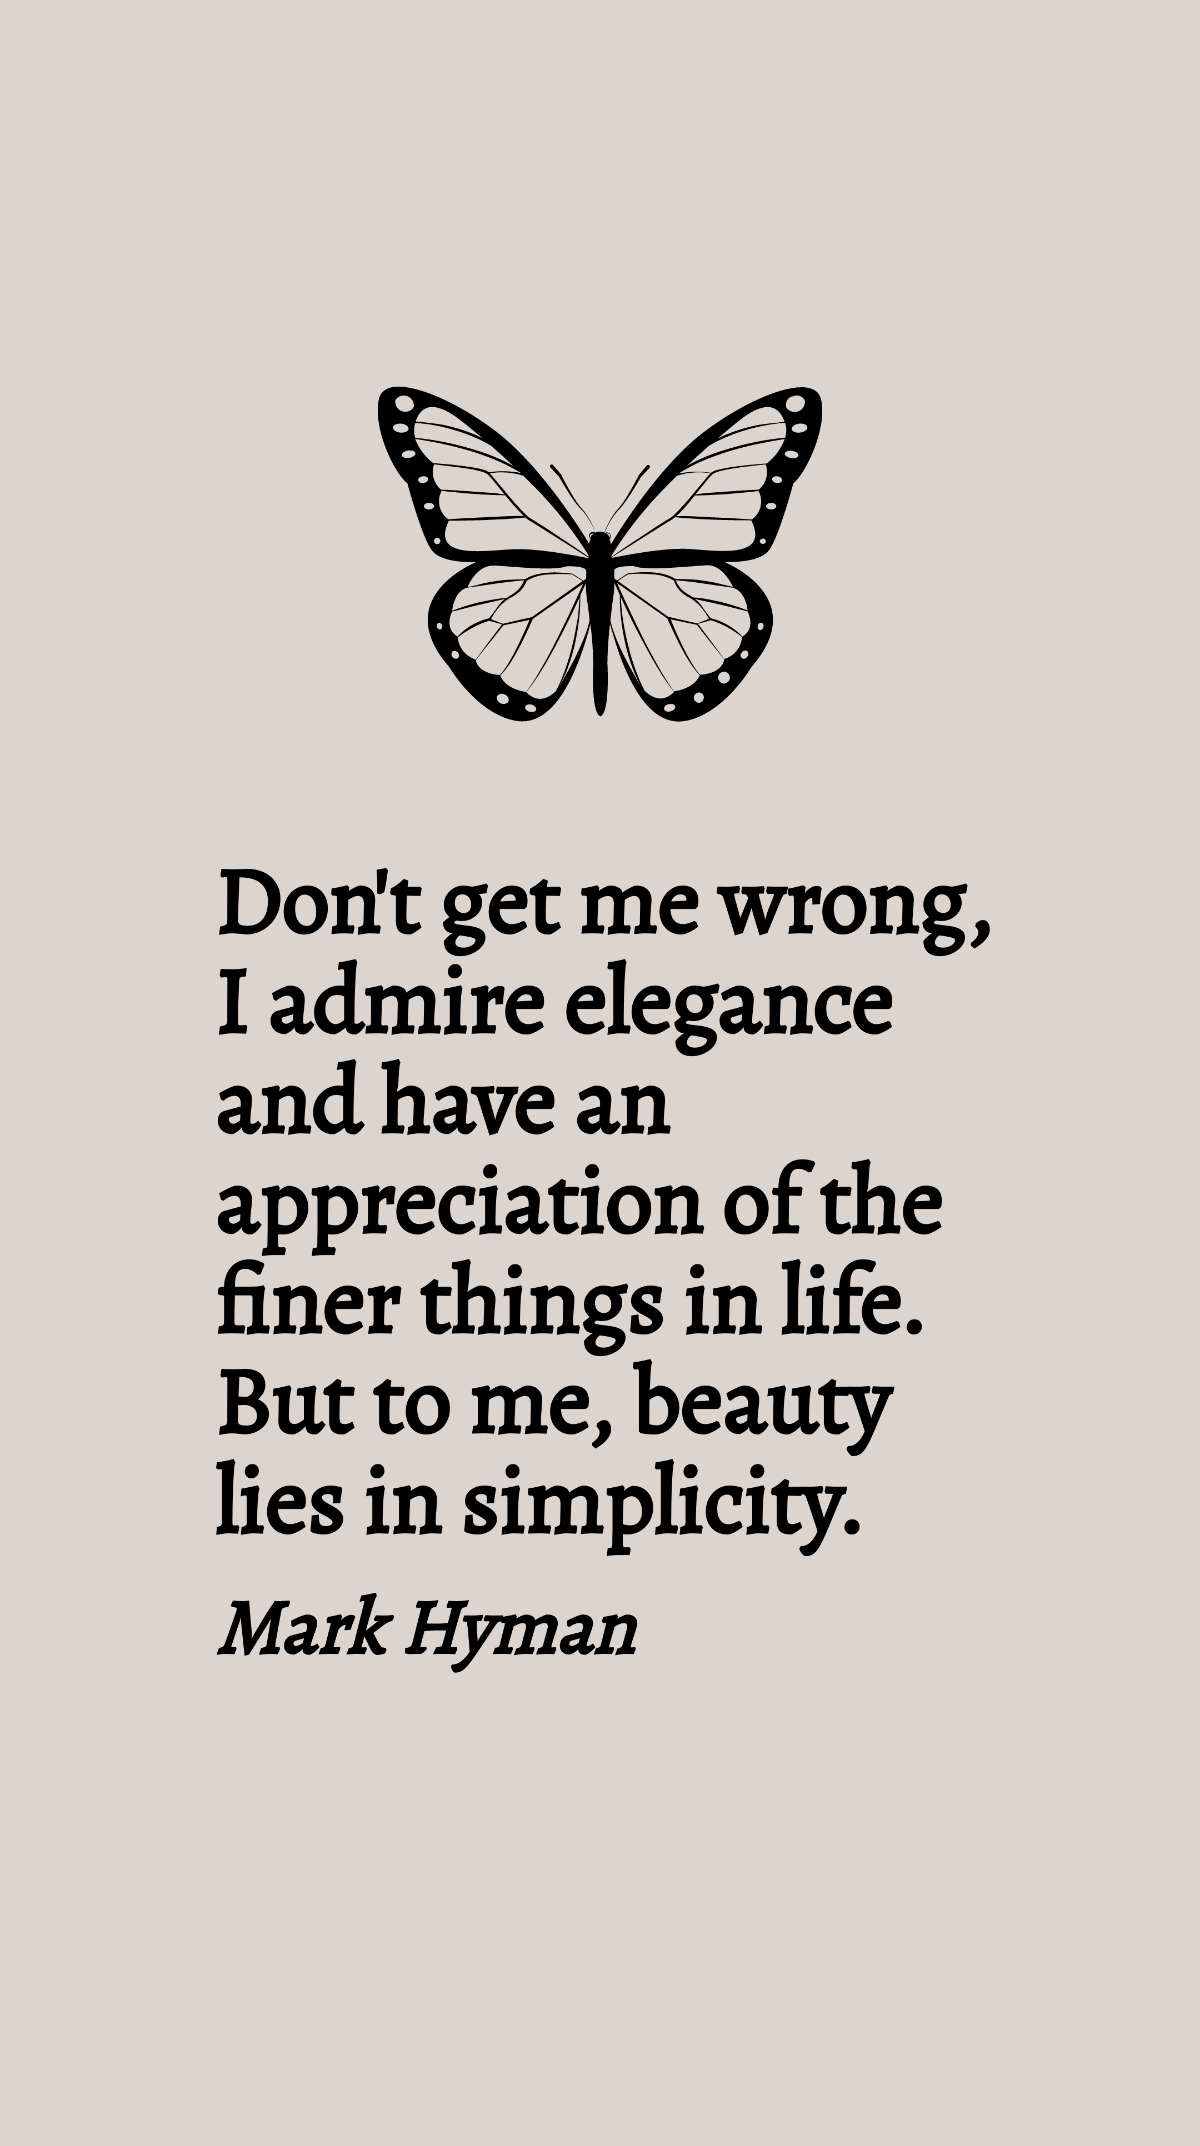 Free Mark Hyman - Don't get me wrong, I admire elegance and have an appreciation of the finer things in life. But to me, beauty lies in simplicity. Template